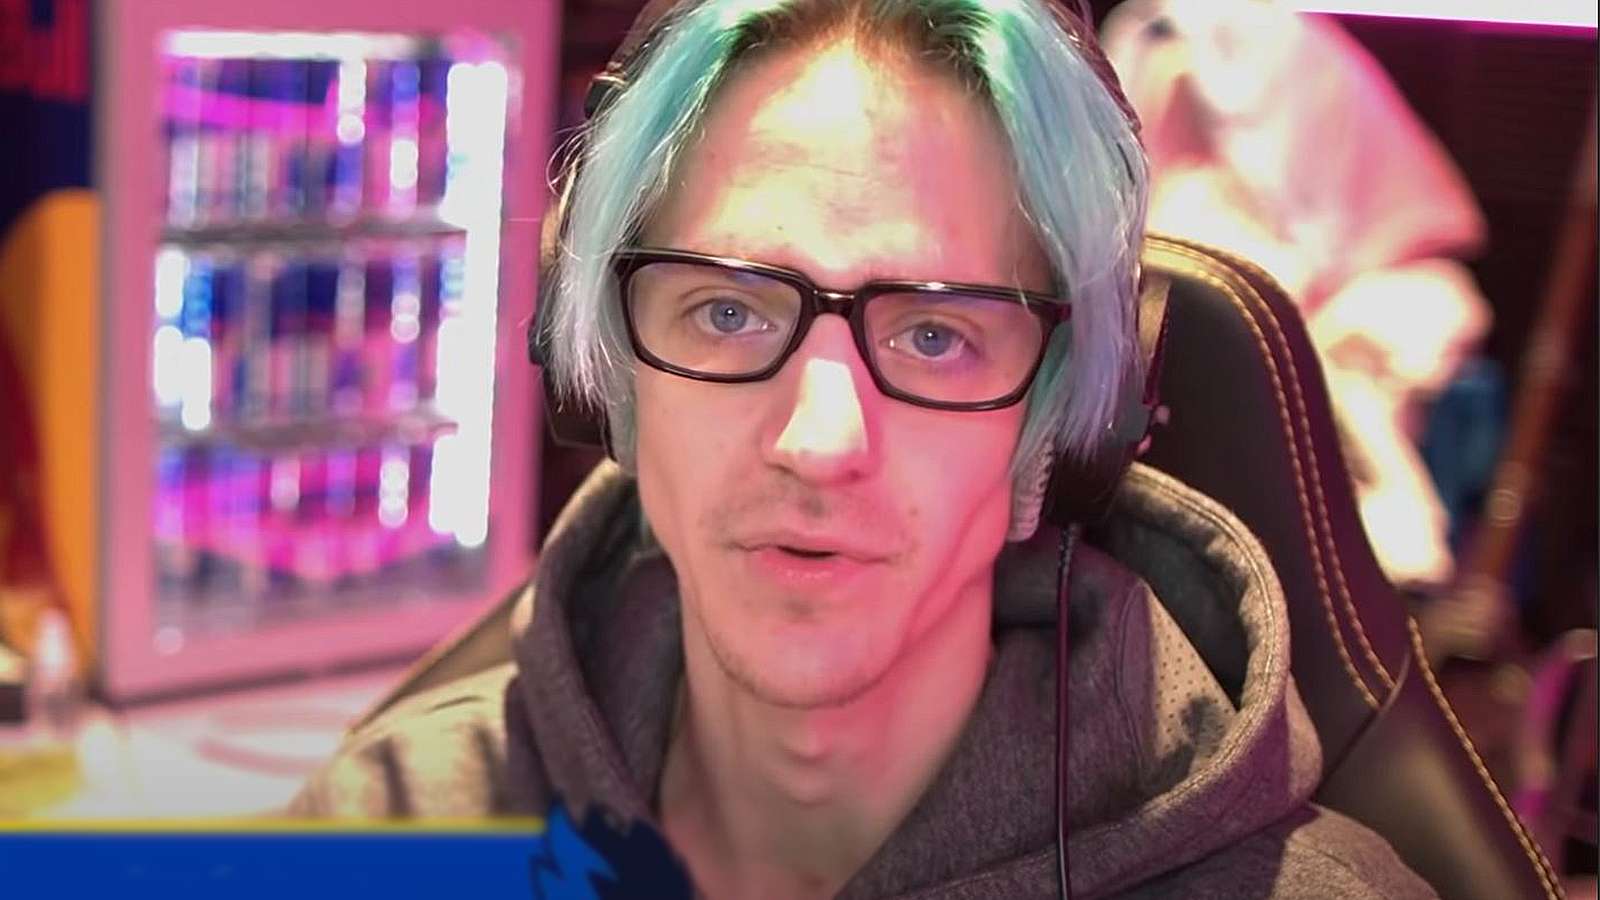 Ninja explains why better parenting can help online toxicity